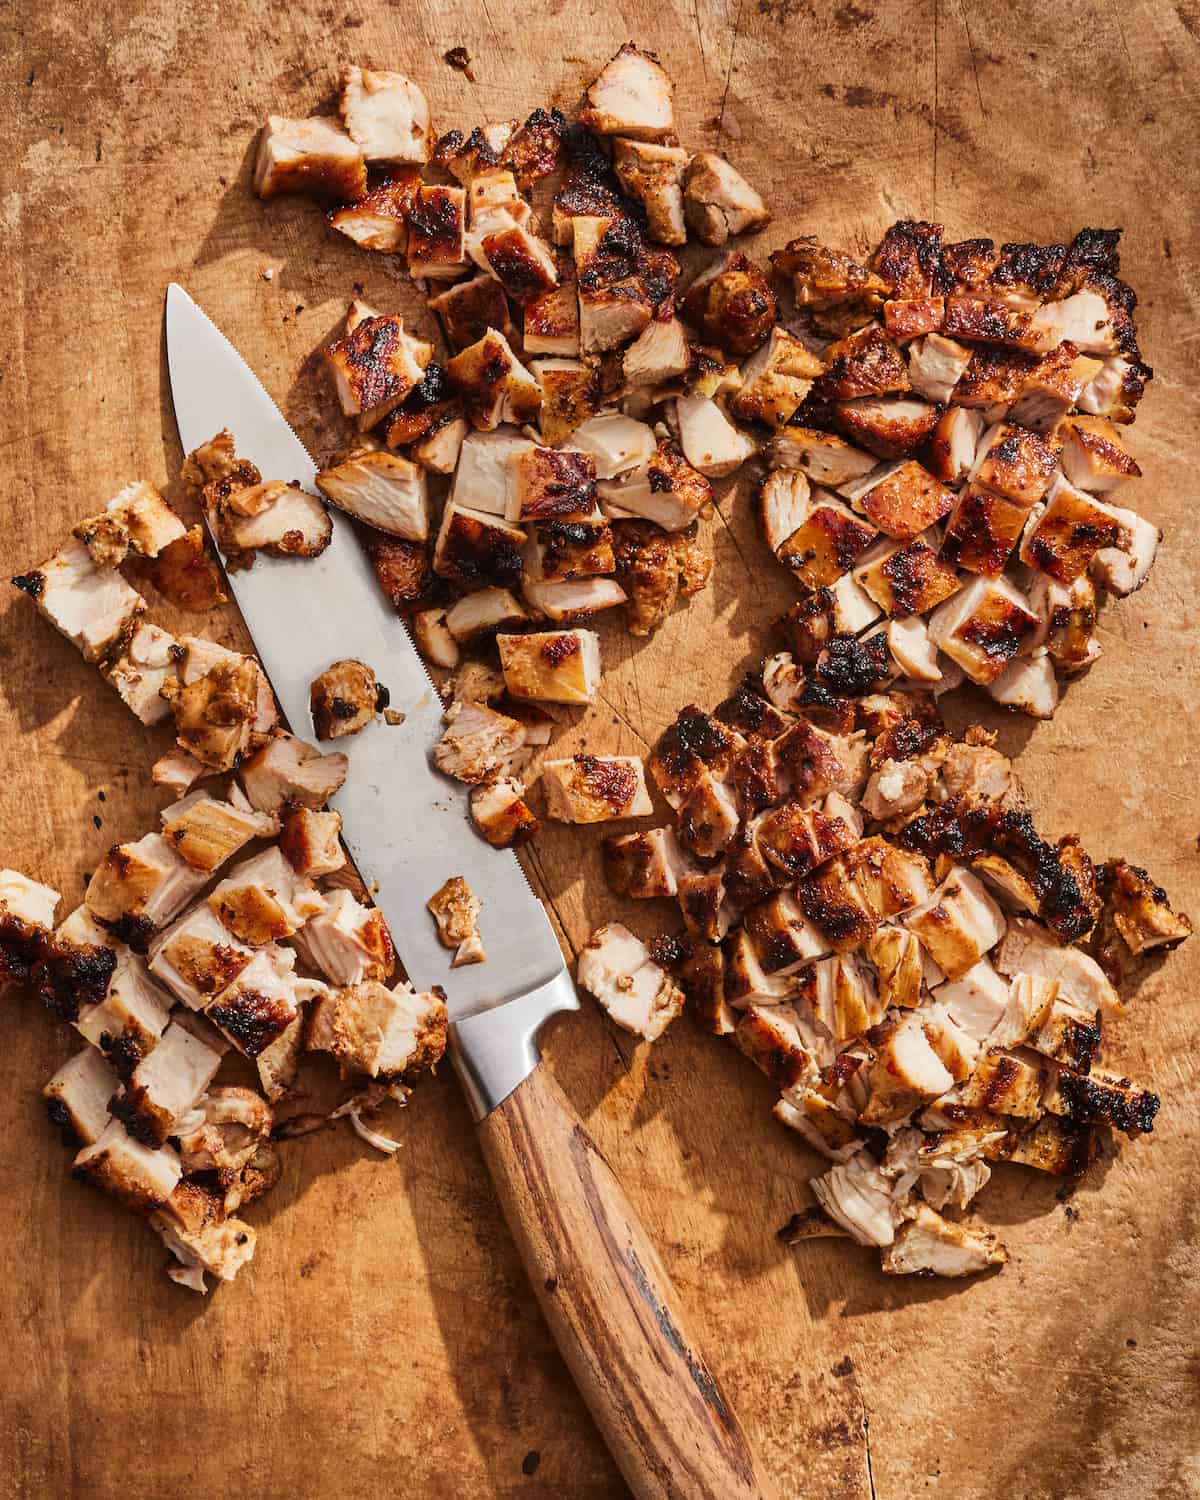 Roasted chicken that has been diced up on a wood cutting board.  A chefs knife is also laying amongst the cut up chicken on the cutting board.  